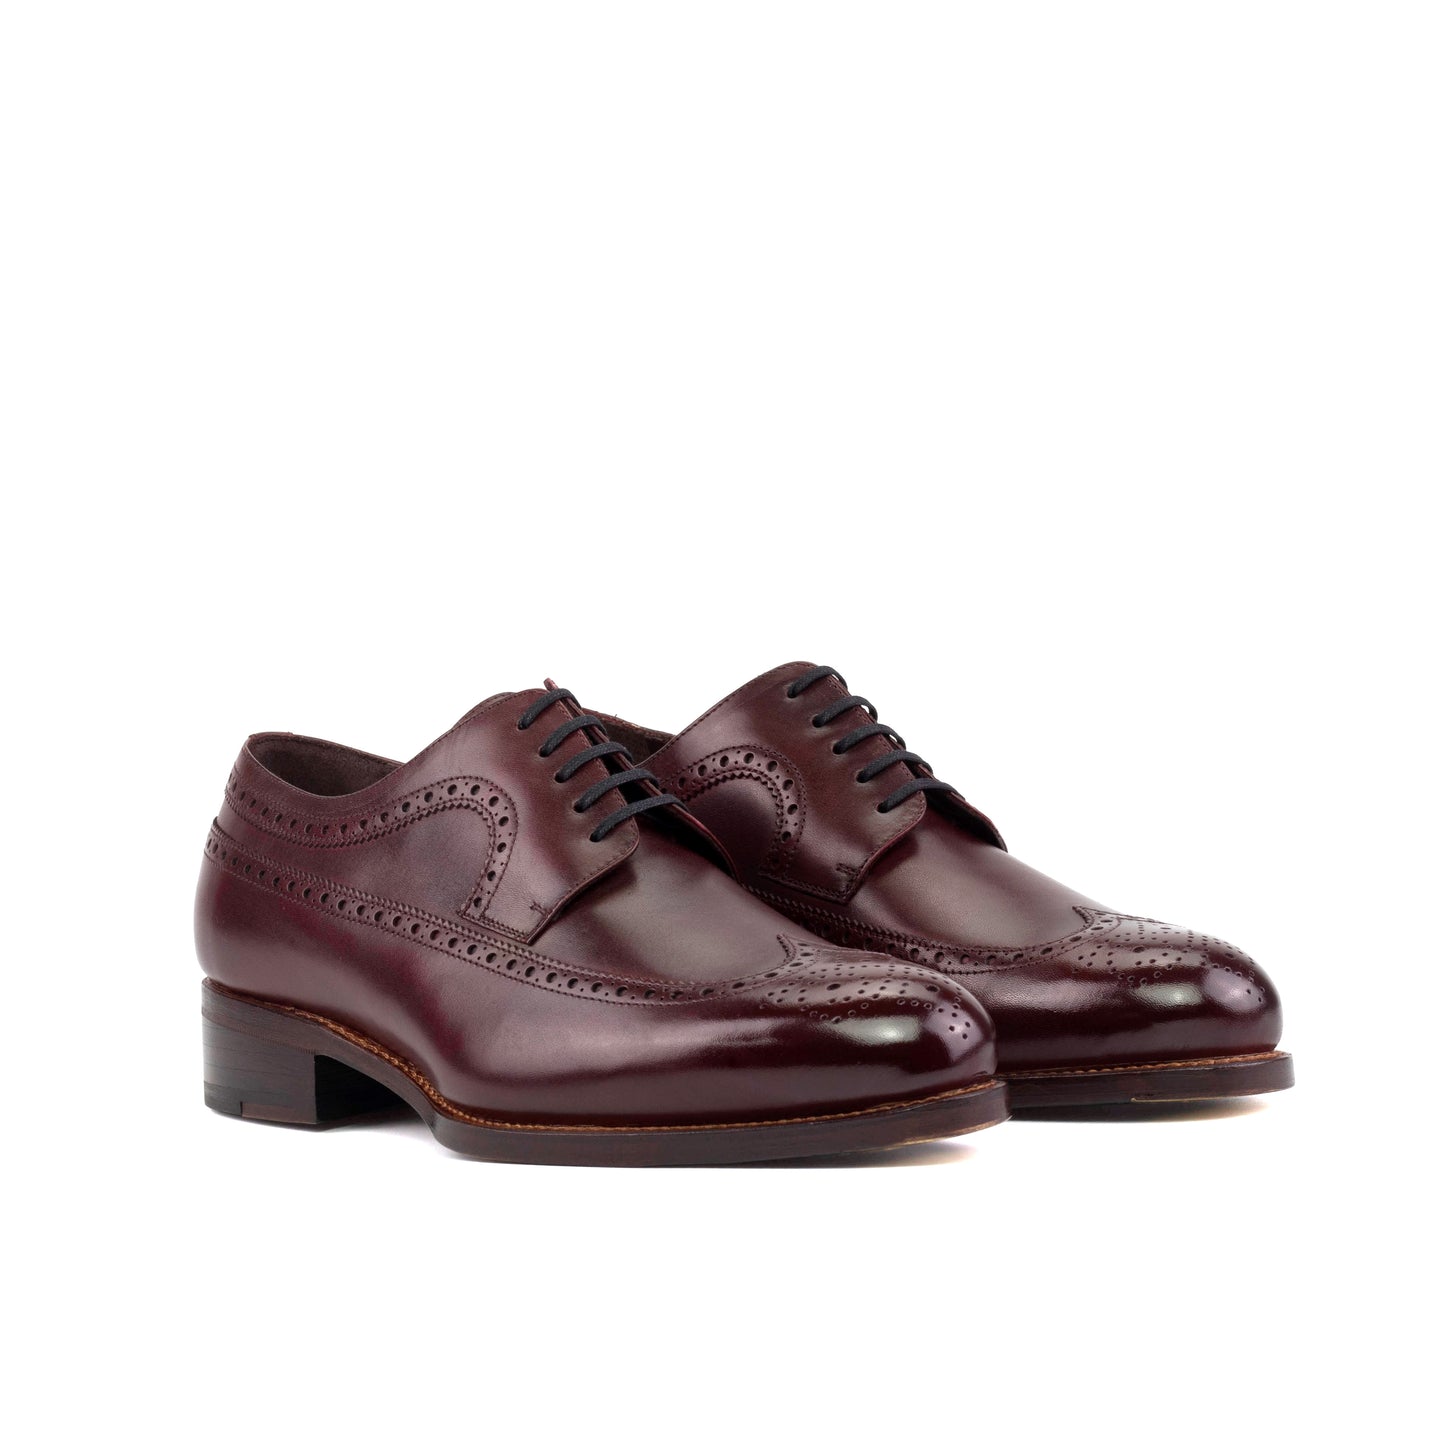 The Longwing Blucher